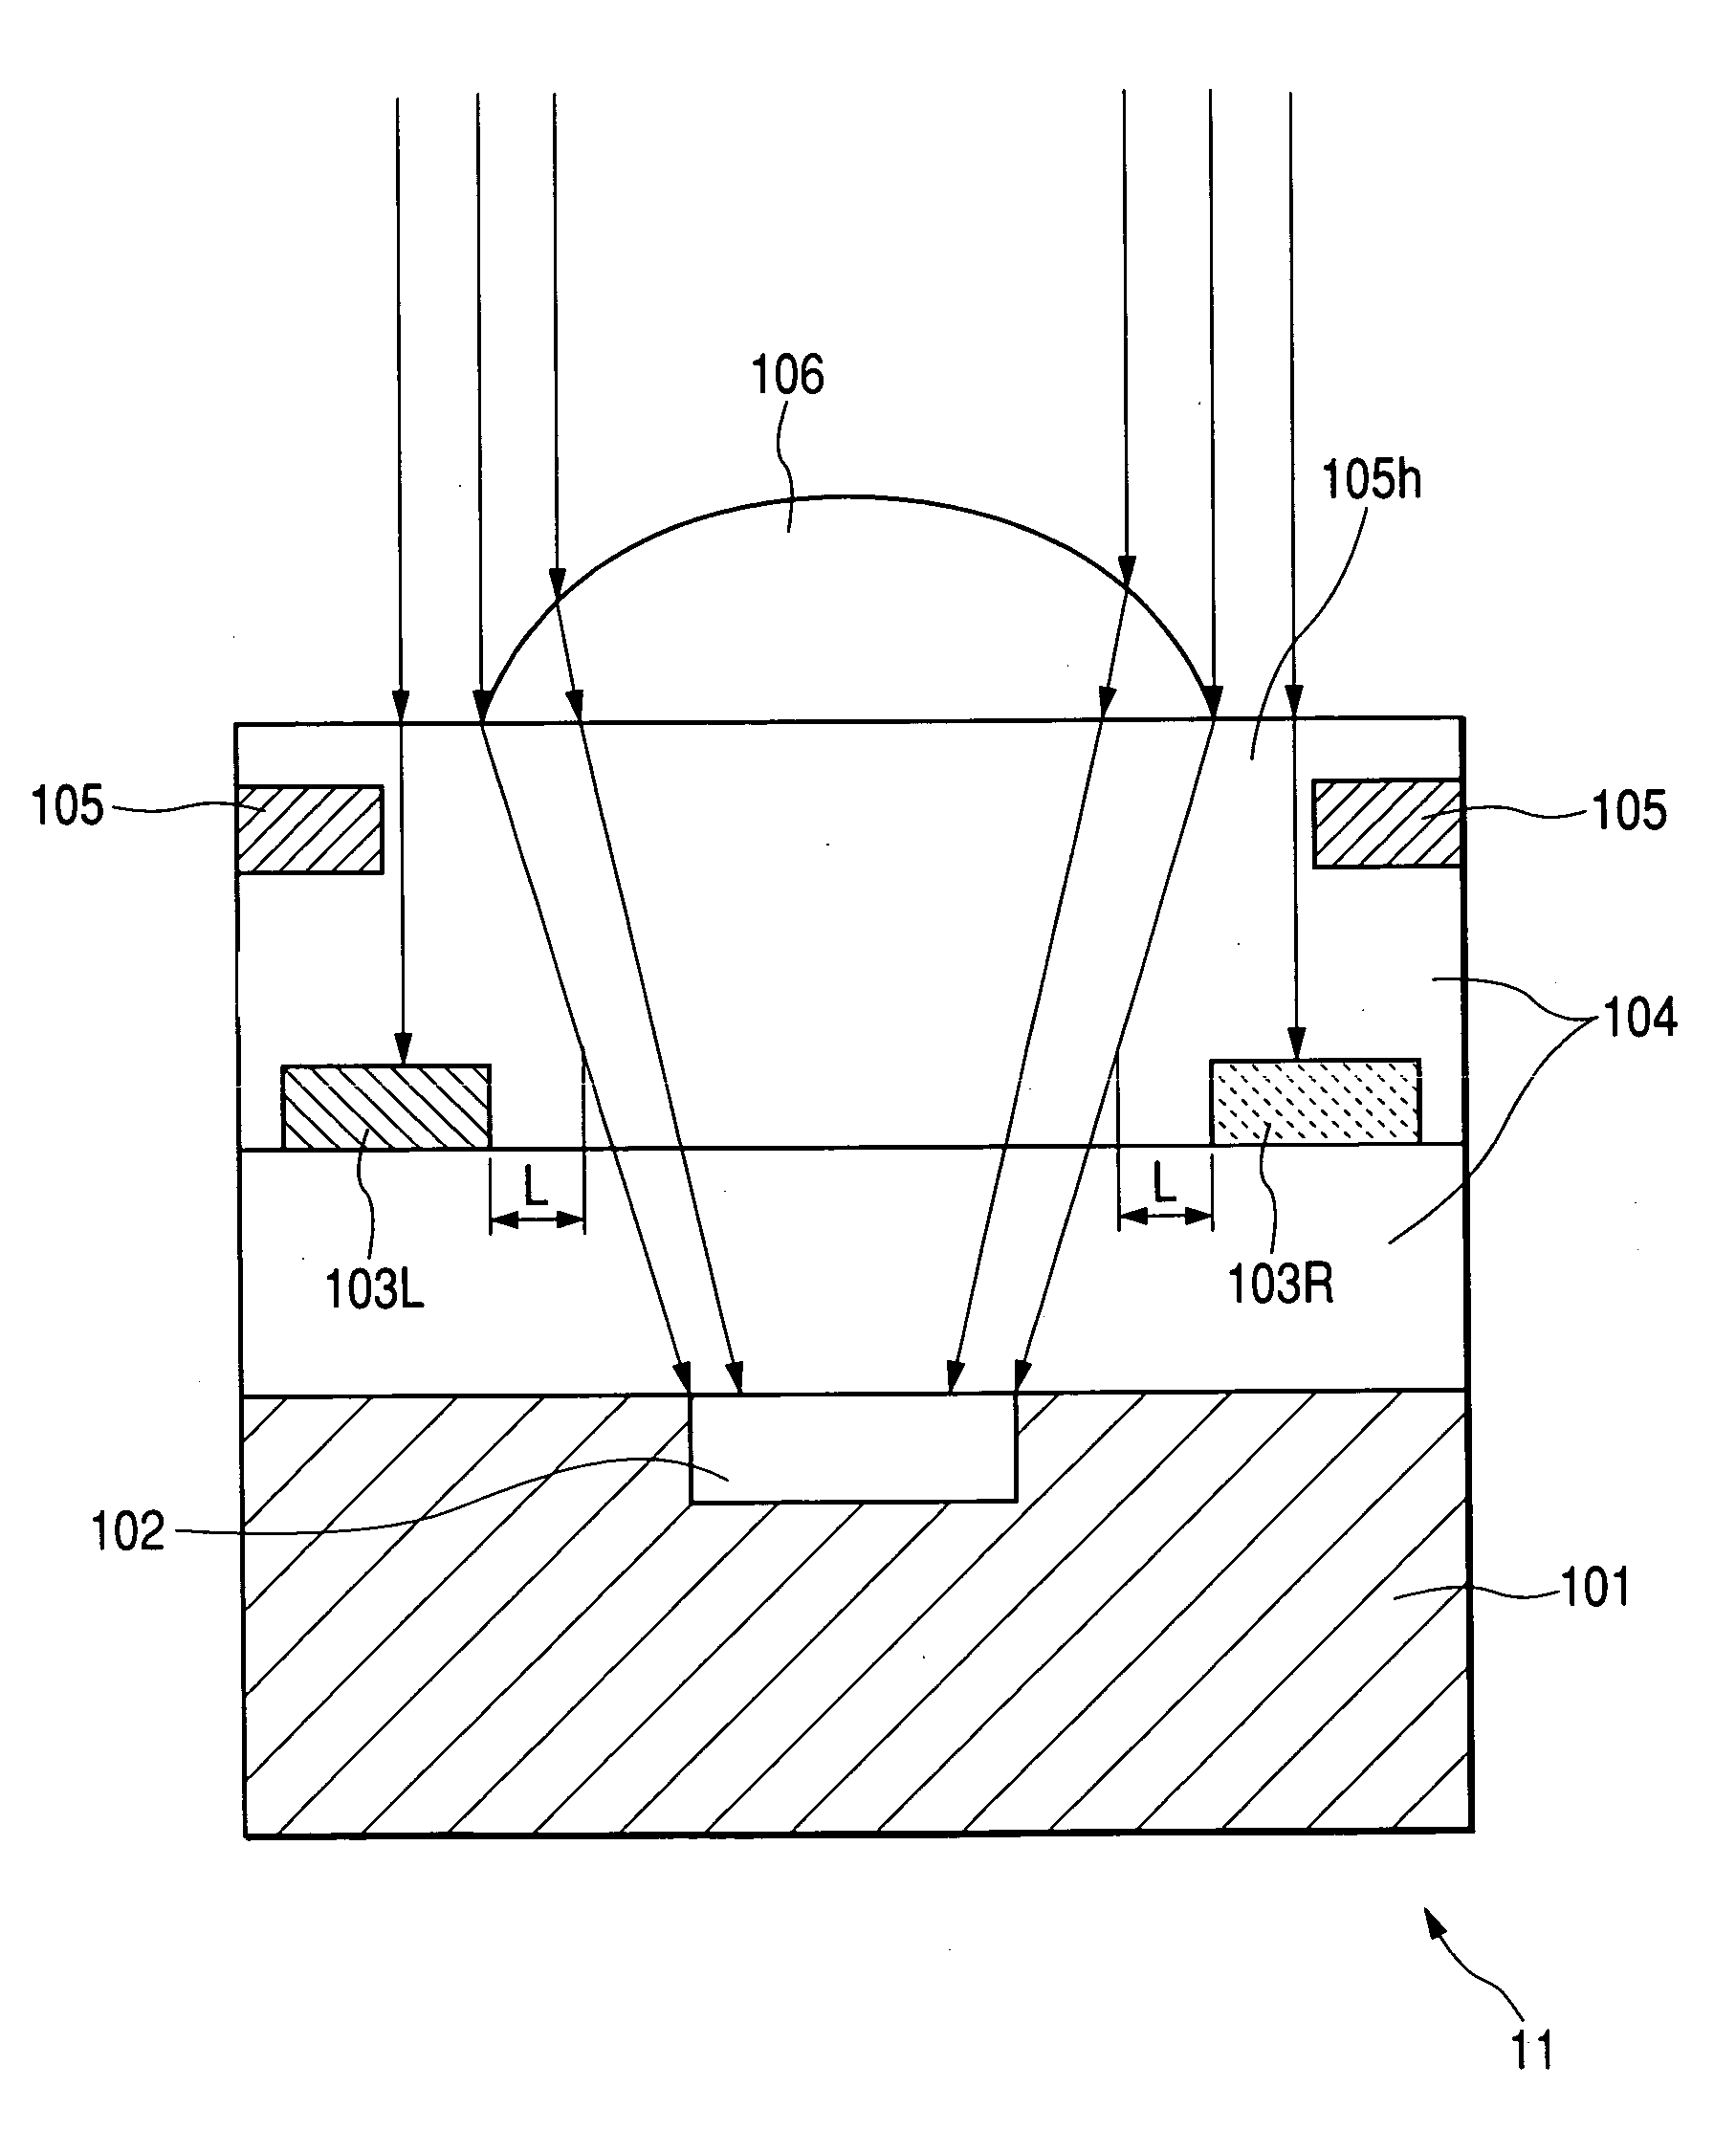 Solid state image pickup device, method for producing the same, and image pickup system comprising the solid state image pickup device